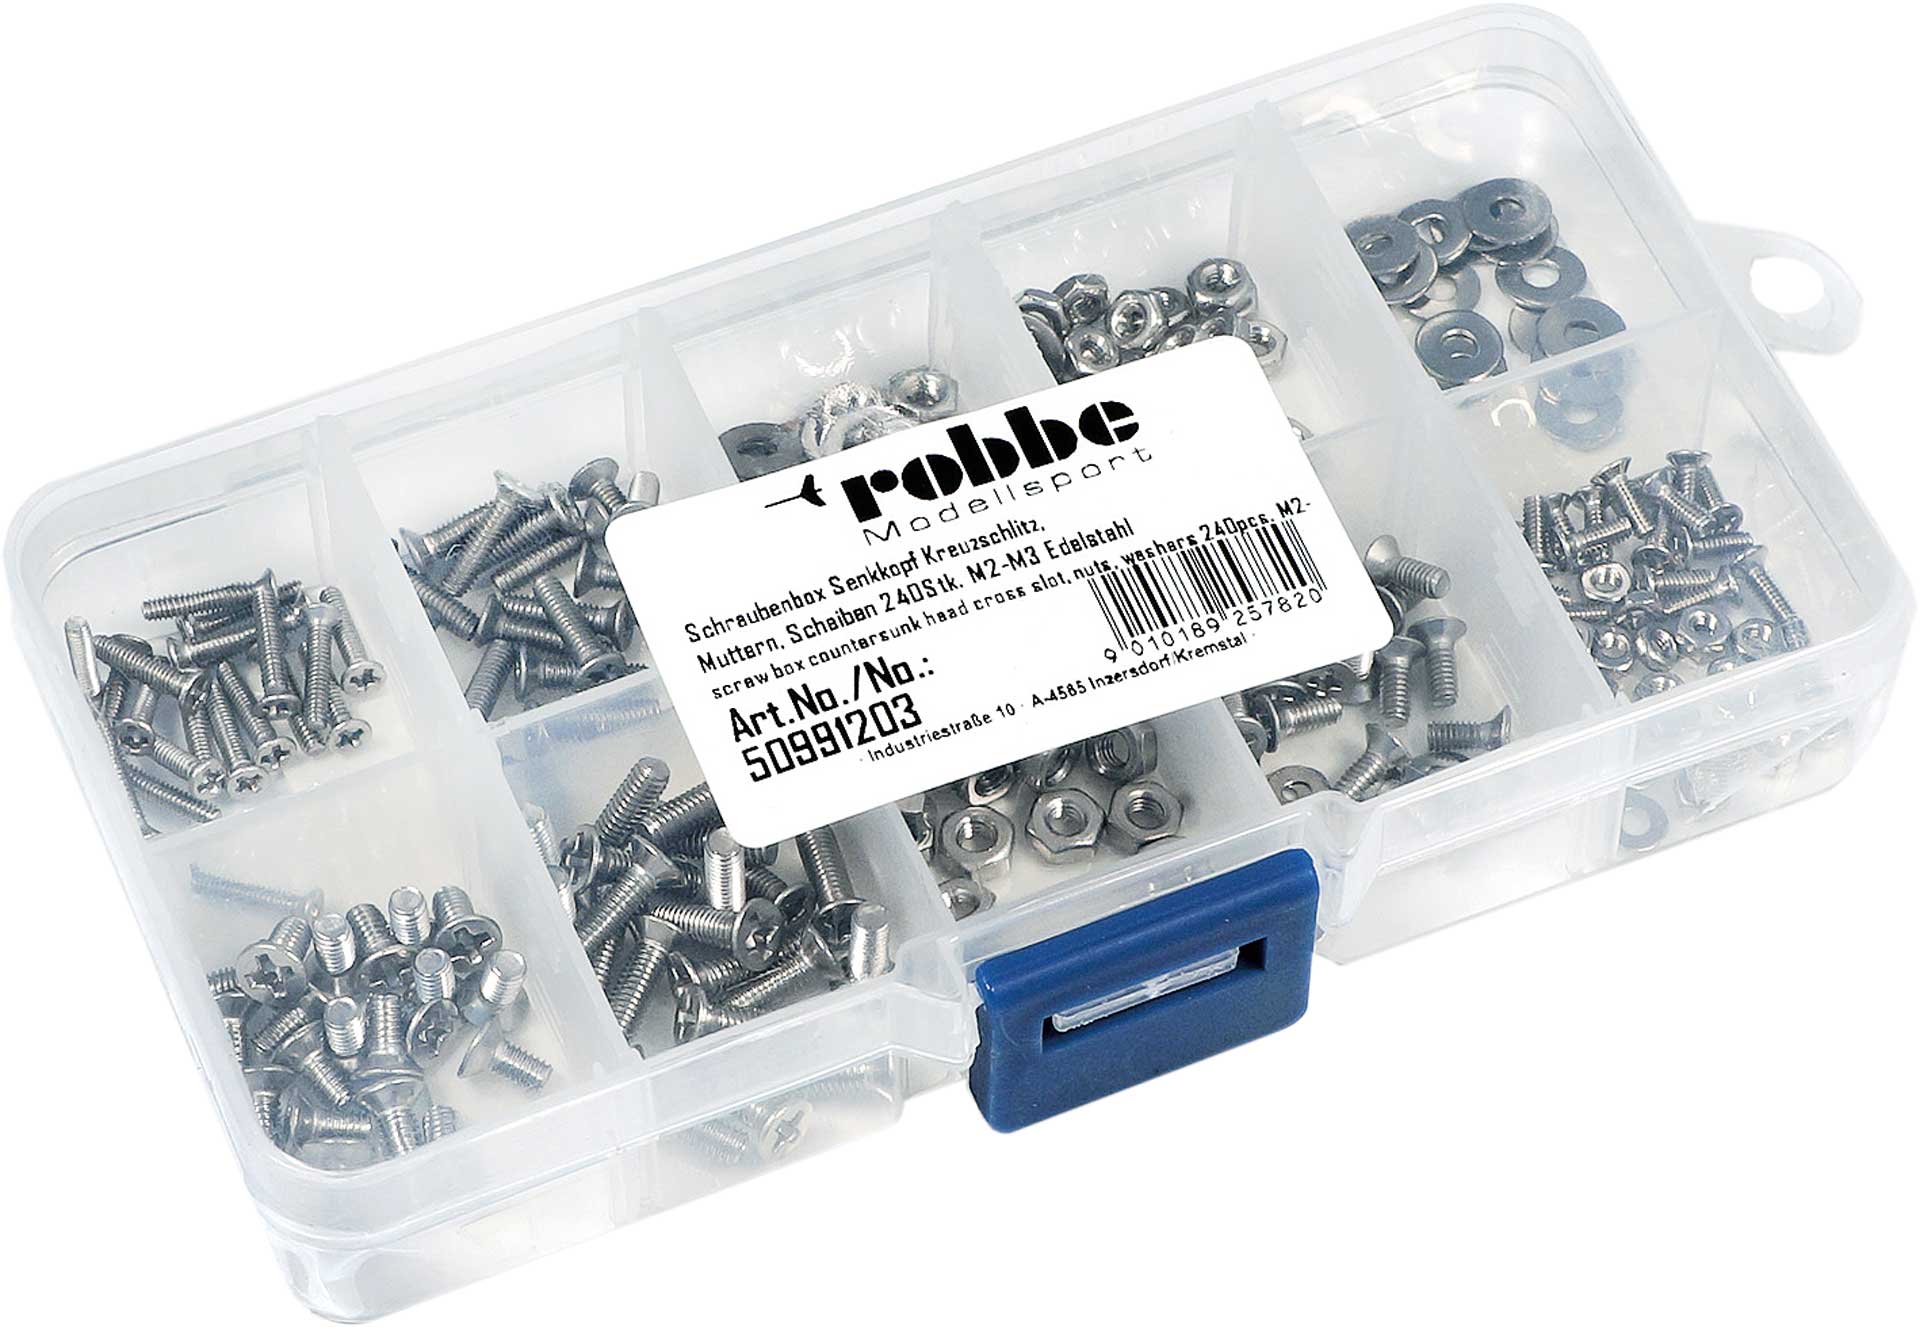 Robbe Modellsport Screw box countersunk head cross recess, Nuts, washers 240pcs M2-M3 stainless steel